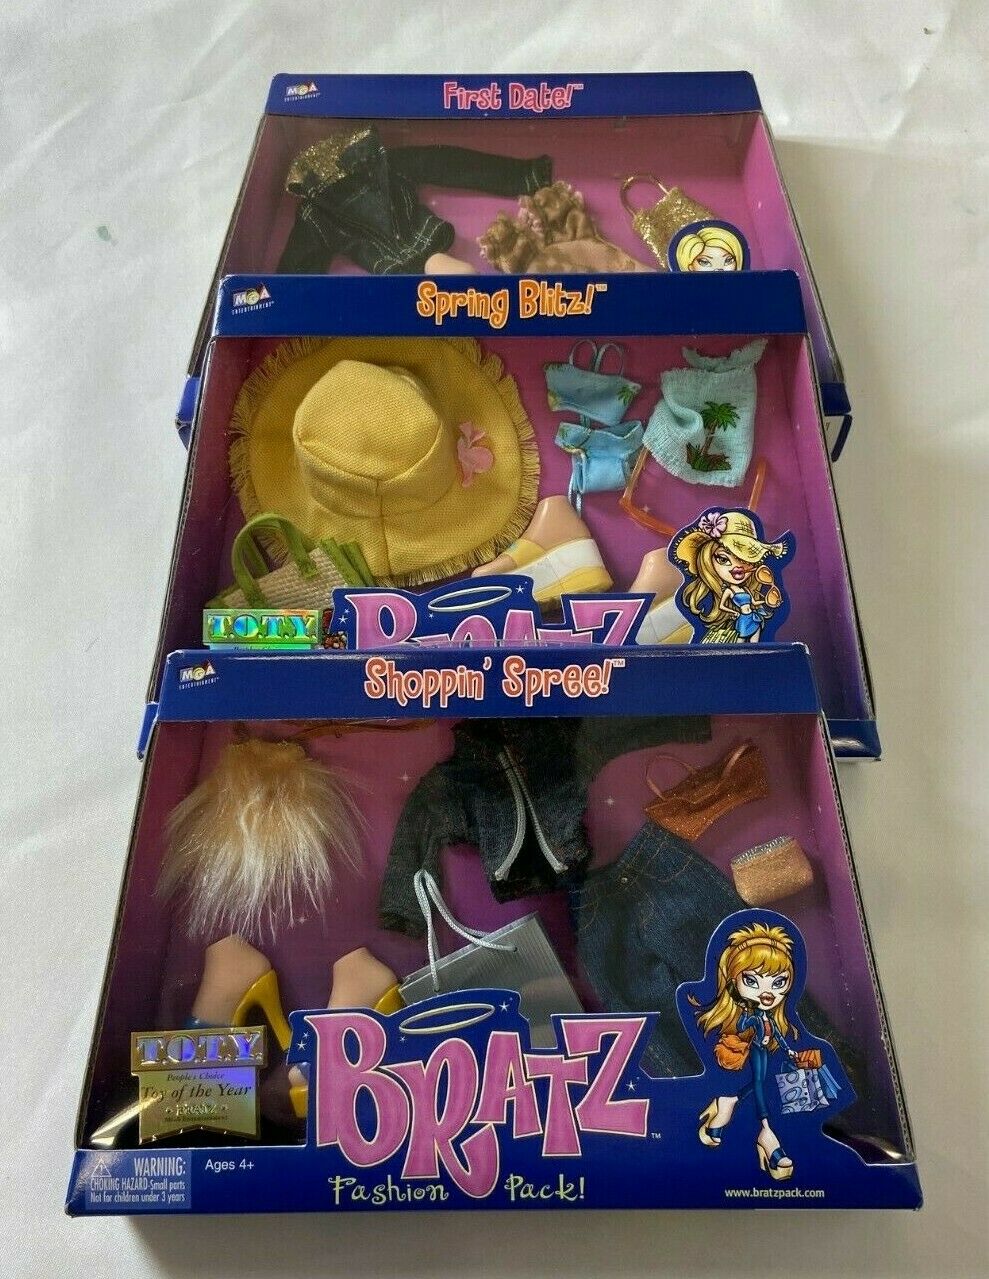 3 Pack Full Collection Bratz Girls Doll Fashion Pack Clothesw/ Shoes Light Skin